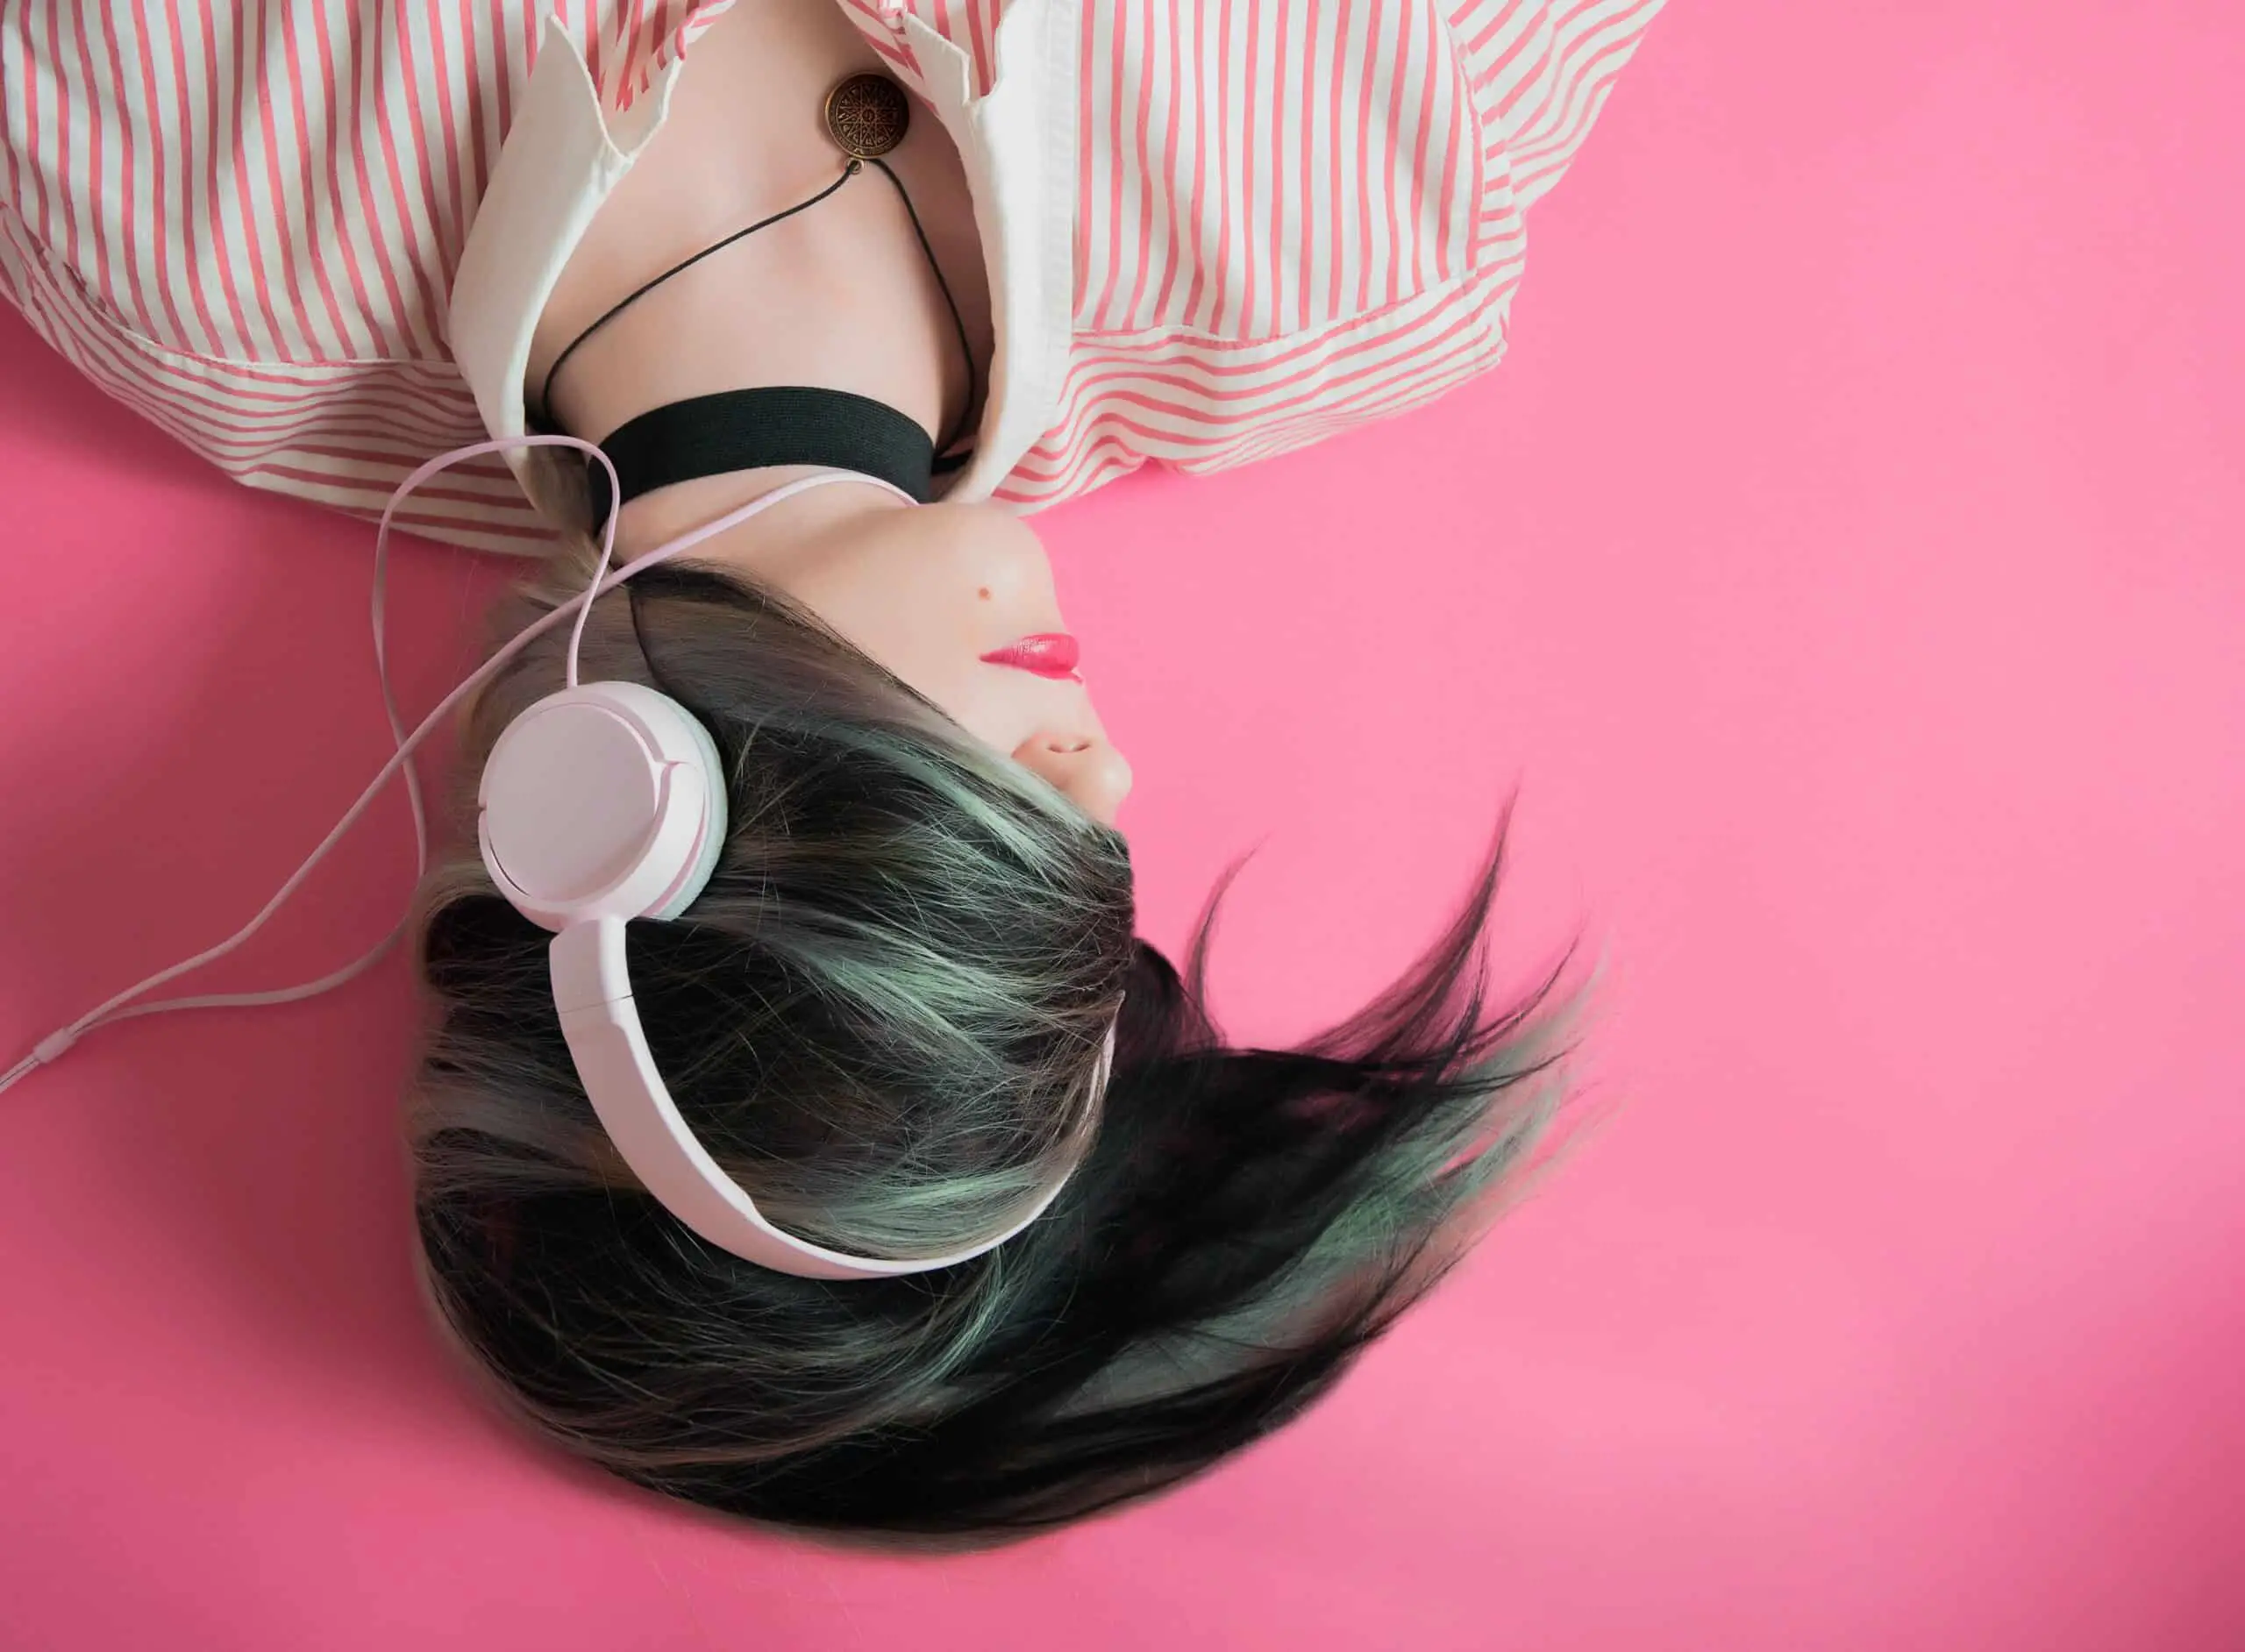 5 Of The Best Apps For Music Lovers in 2020